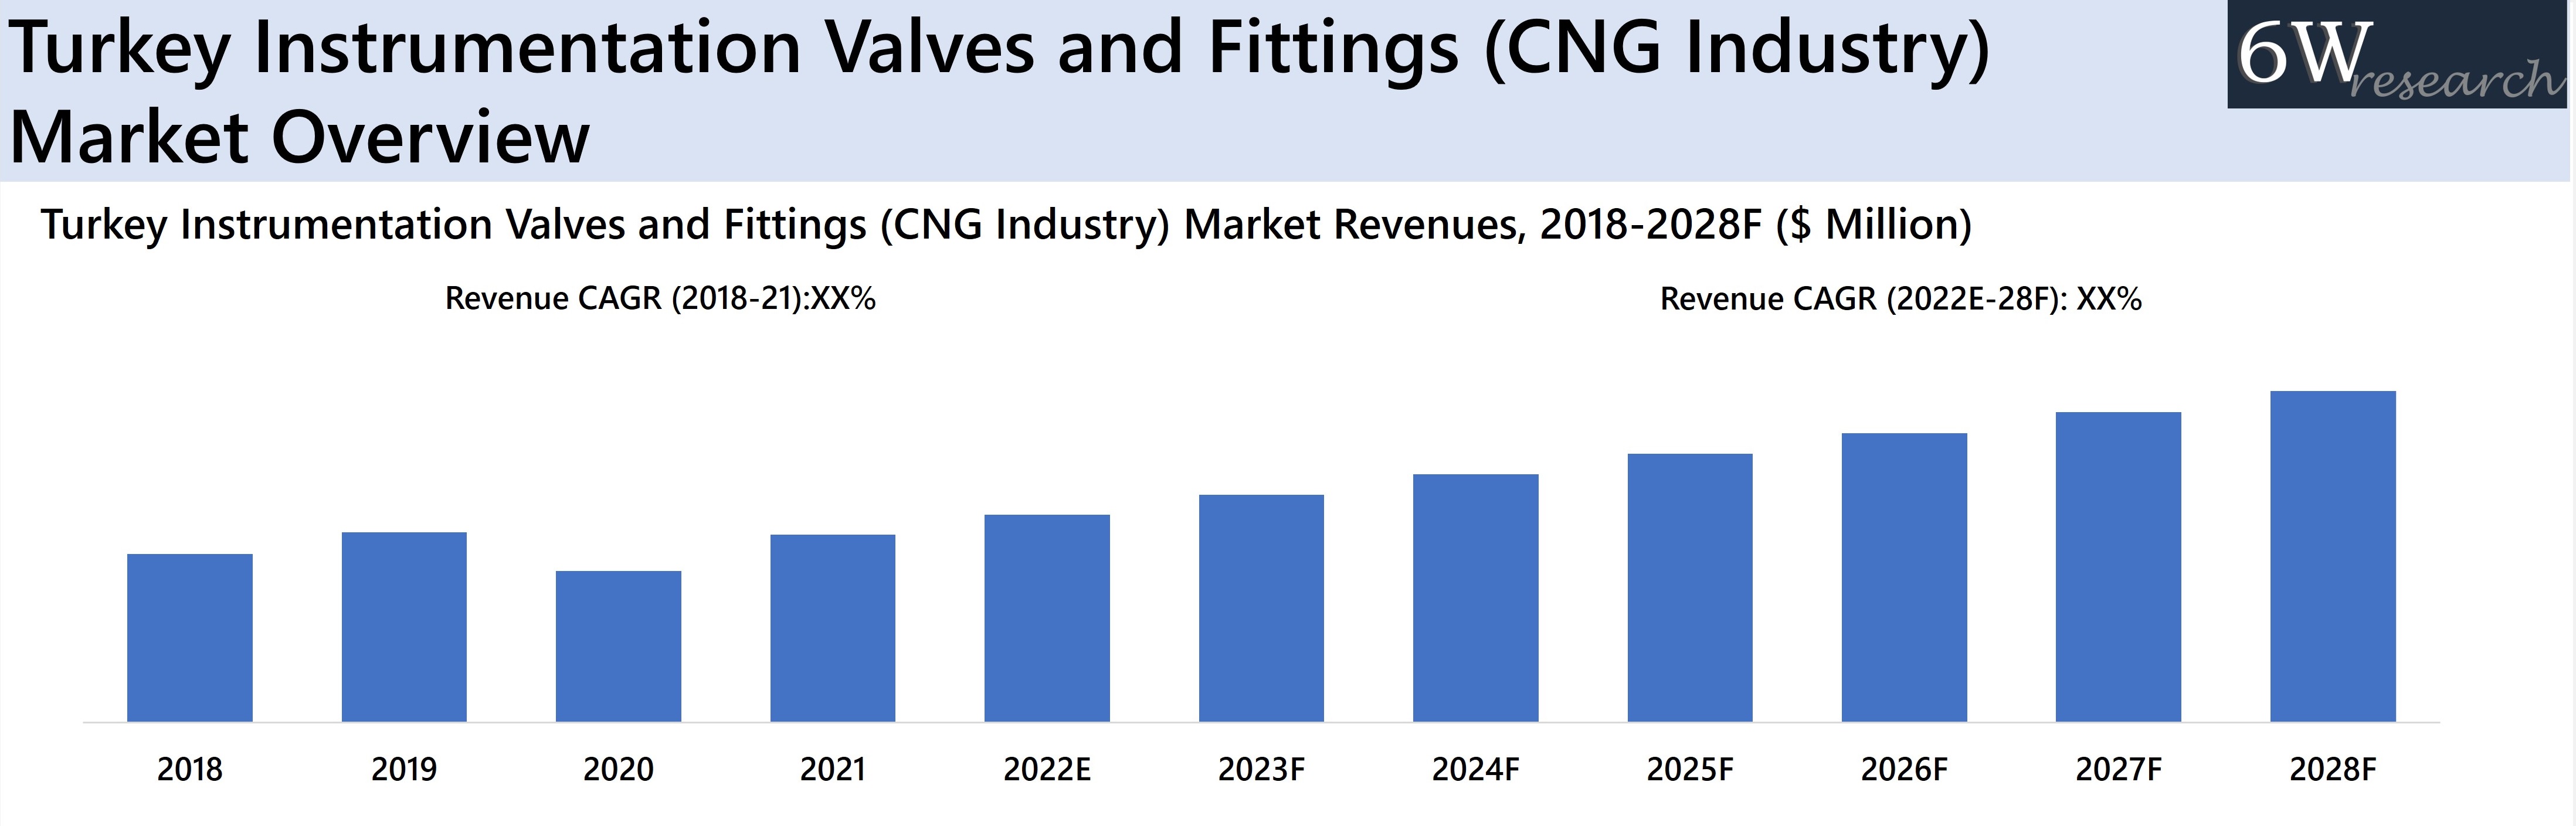 Turkey Instrumentation Valves and Fittings (CNG Industry) Market Overview